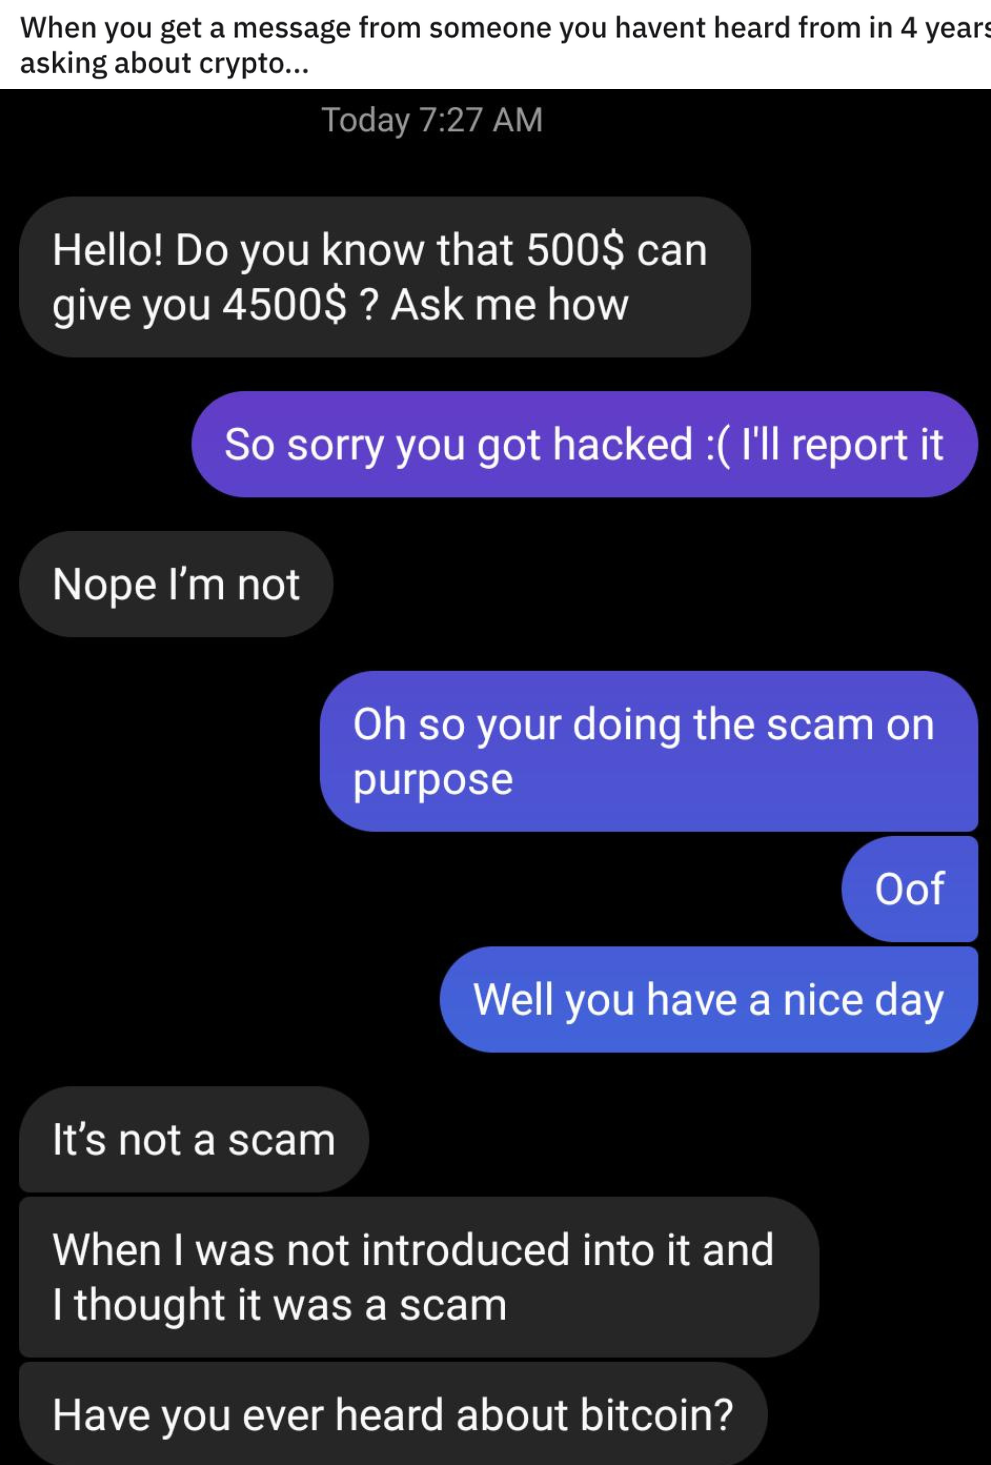 a person trying to scam someone and then asking, &quot;Have you ever heard of bitcoin?&quot;